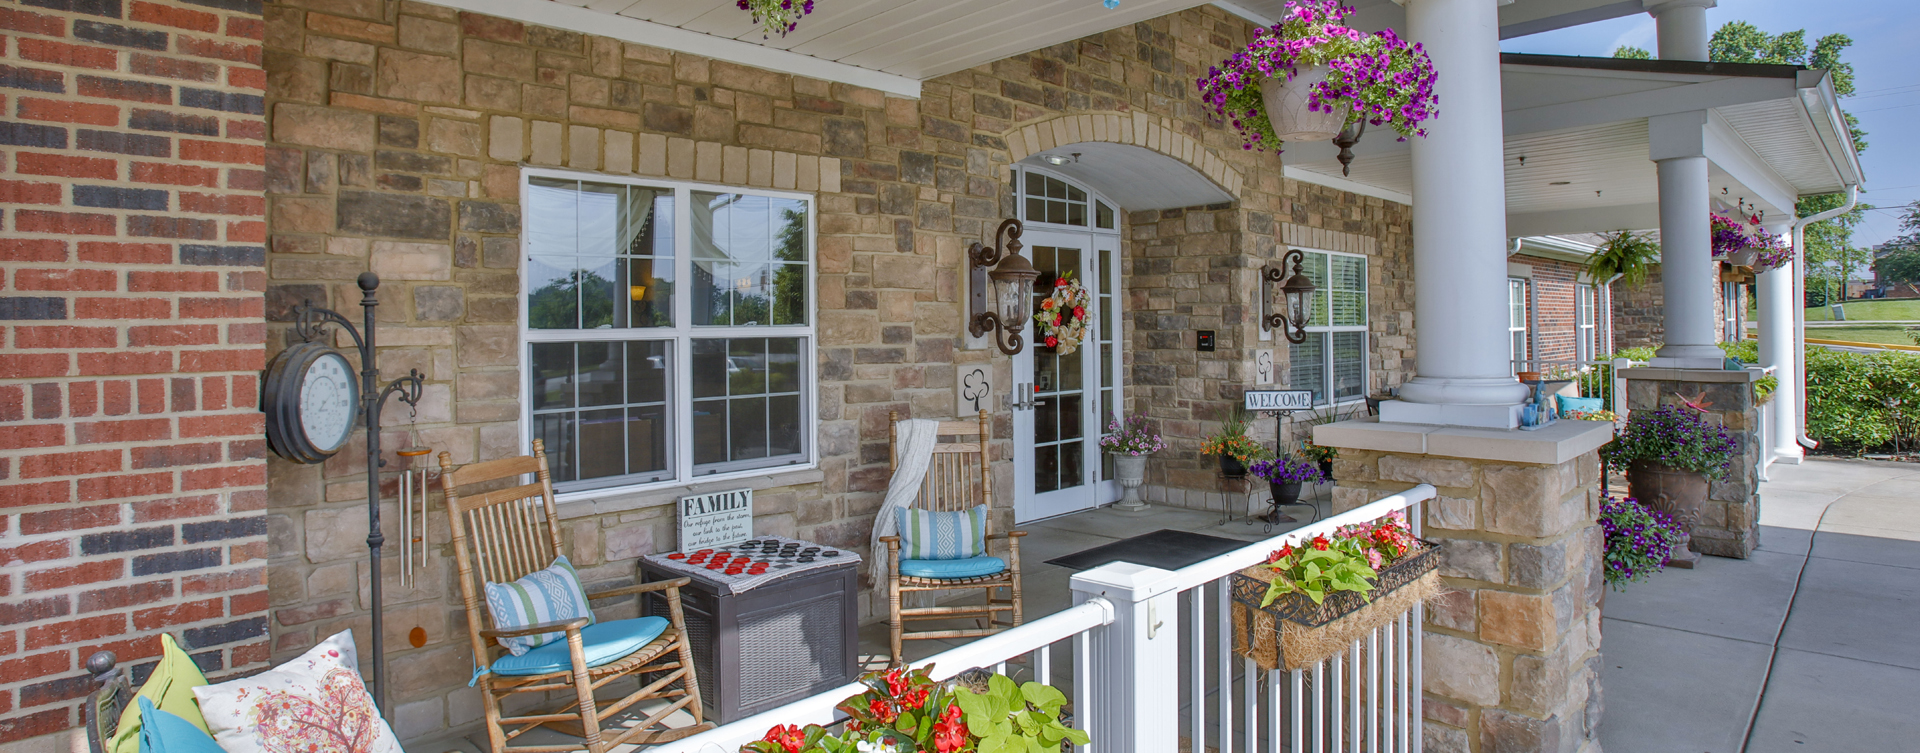 Relax in your favorite chair on the porch at Bickford of Greenwood